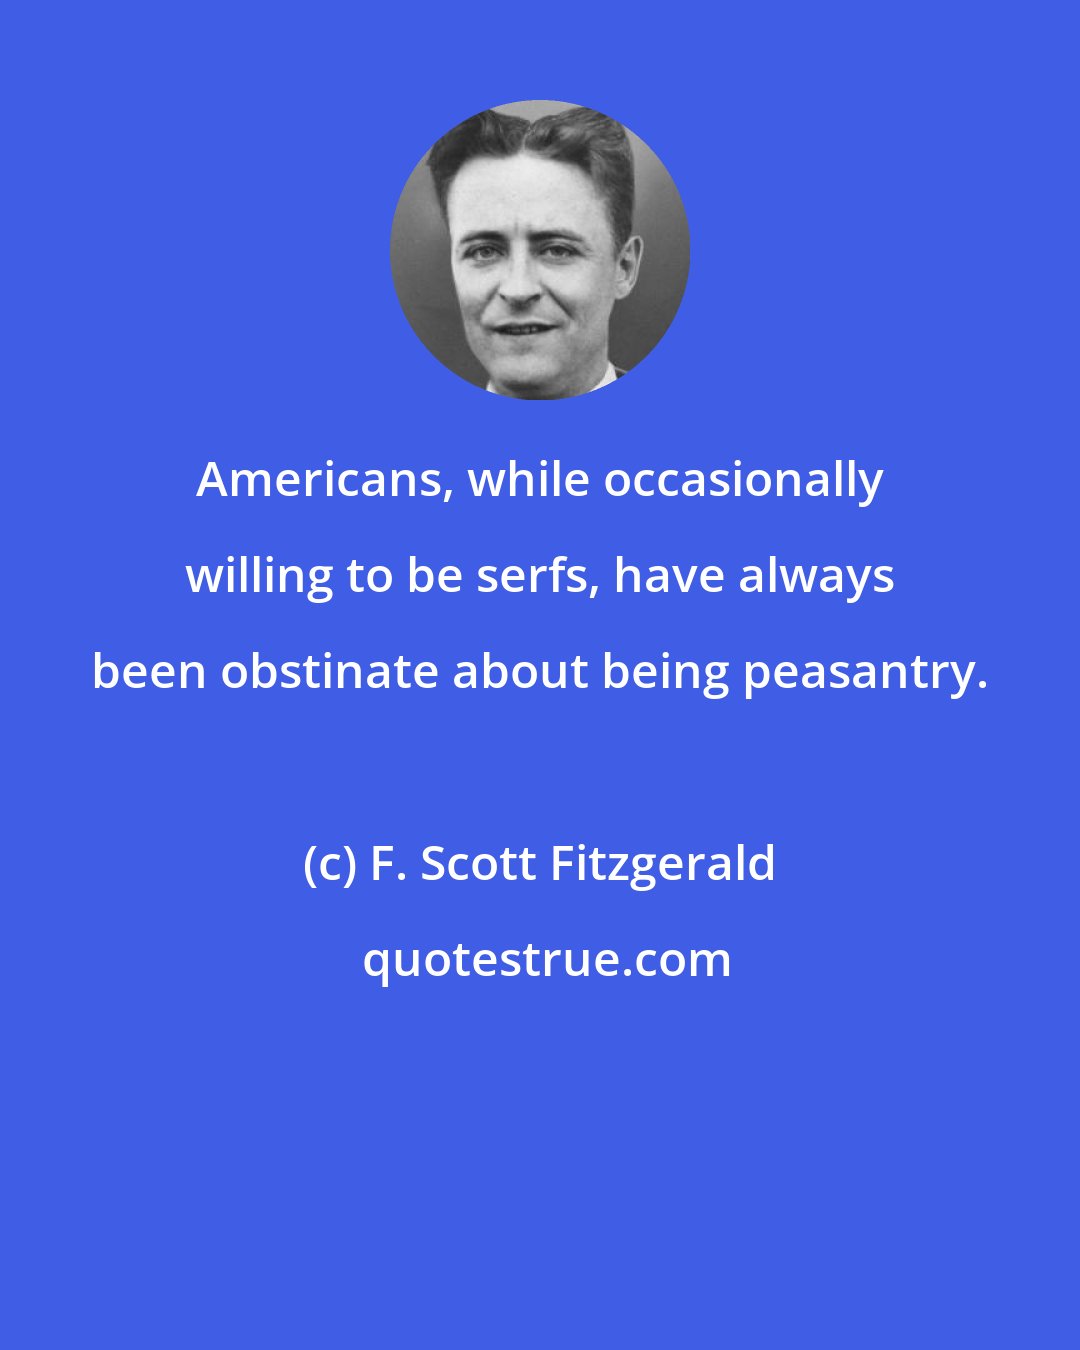 F. Scott Fitzgerald: Americans, while occasionally willing to be serfs, have always been obstinate about being peasantry.